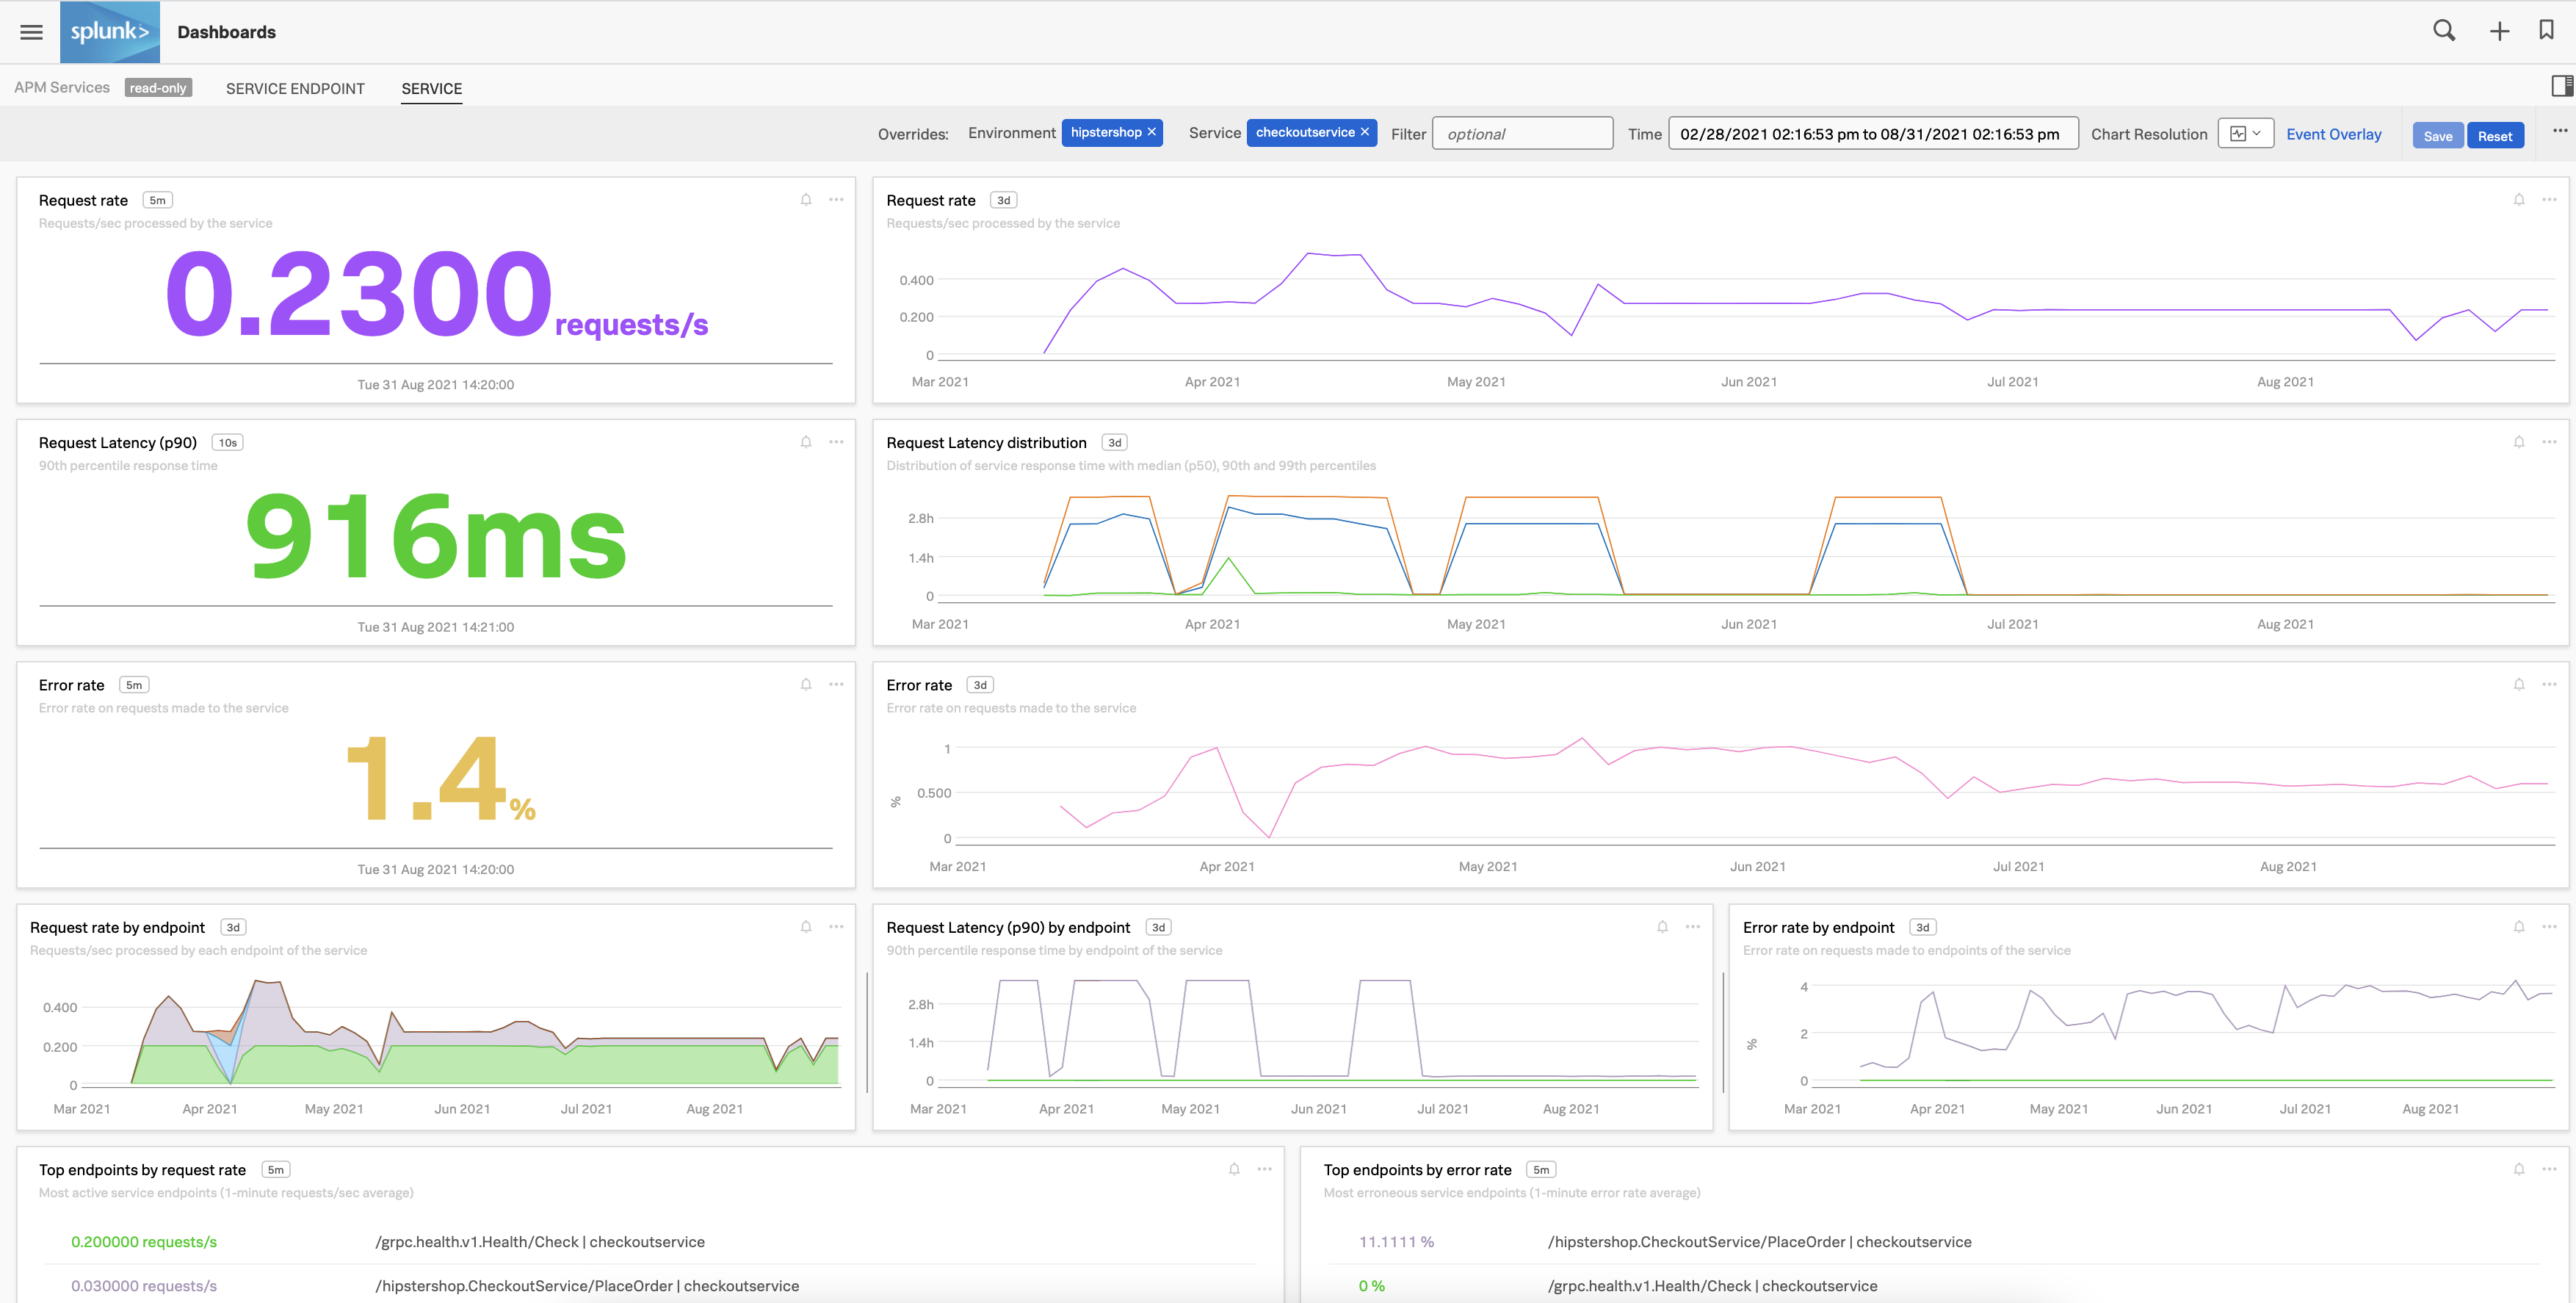 This screenshot shows the service-level dashboard of the checkoutservice's performance in 6 months.